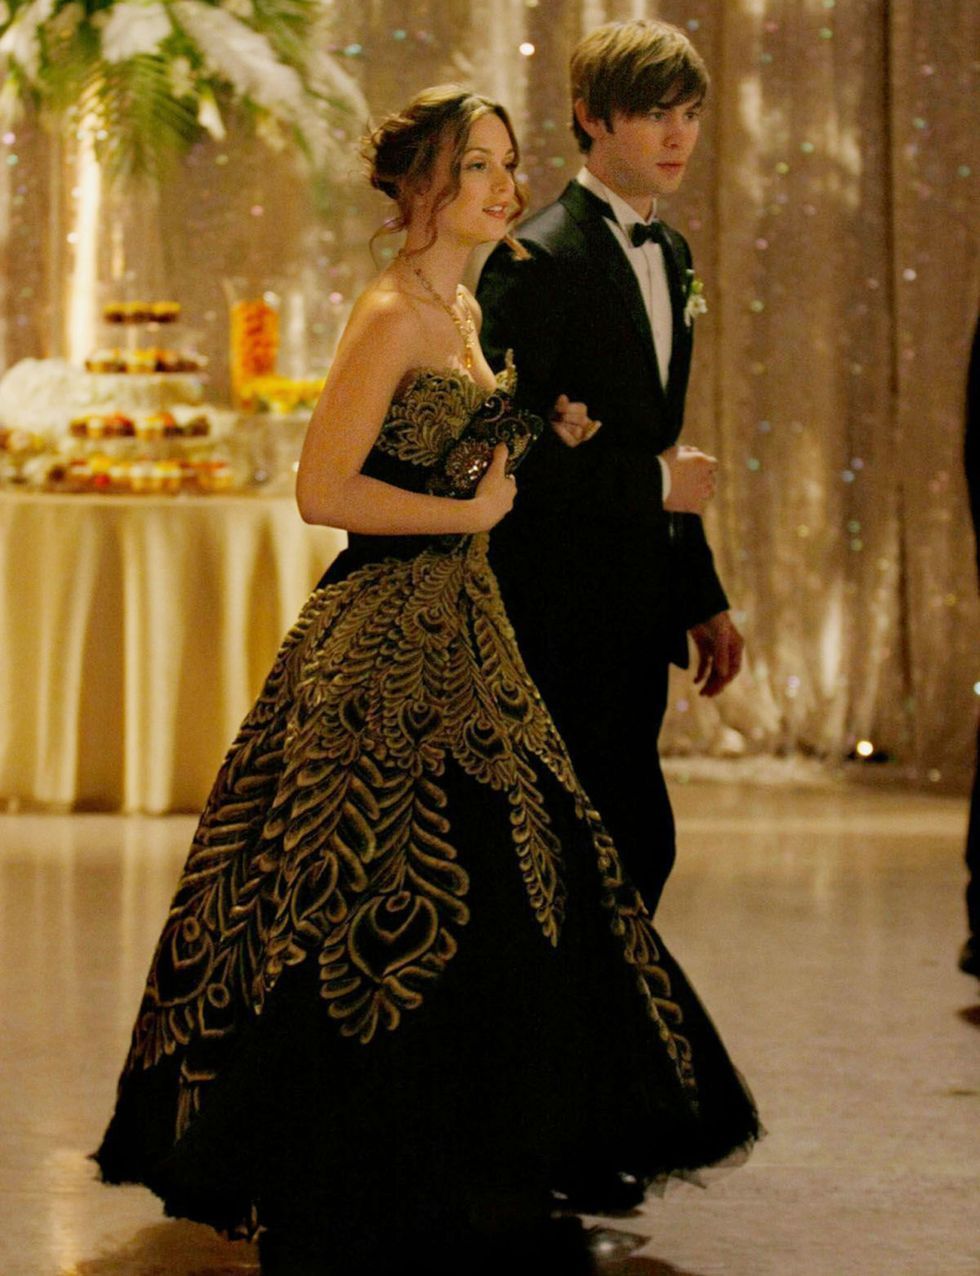 The Definitive Ranking of the Best TV Prom Dresses - The Definitive Ranking of the Best TV Prom Dresses -   11 style Blair Waldorf outfits ideas